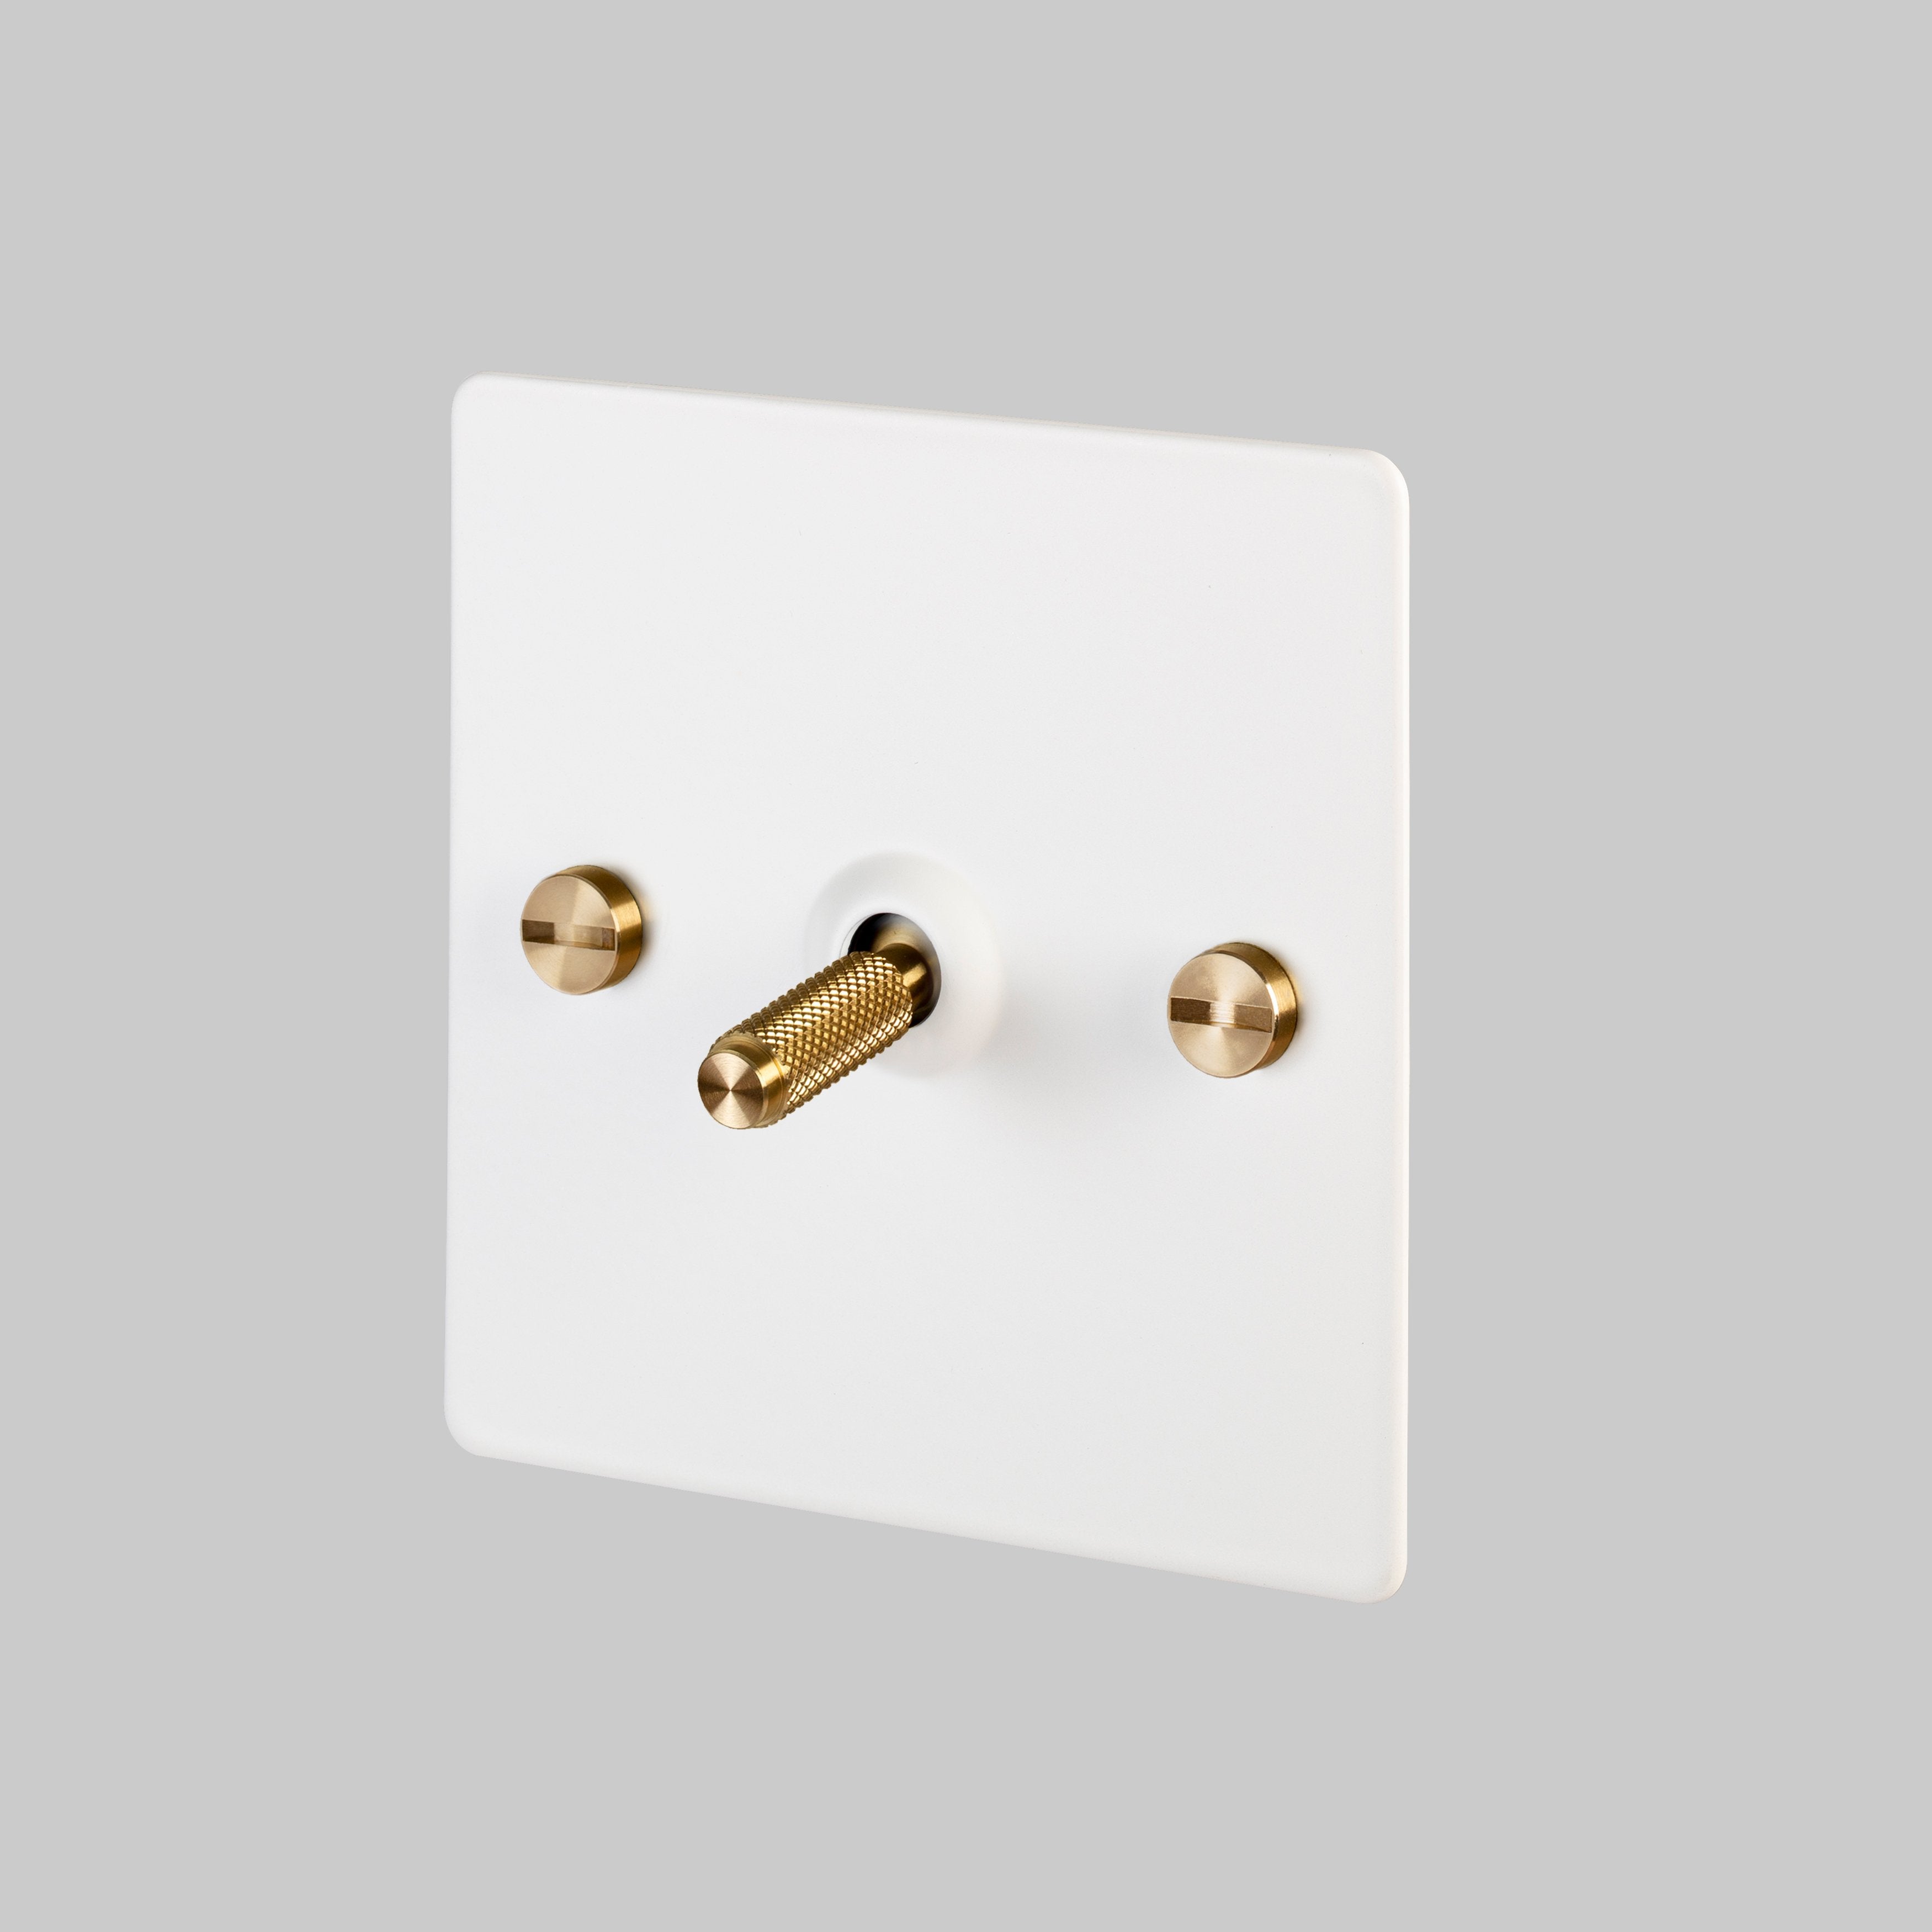 Buster and Punch 1G INTERMEDIATE TOGGLE SWITCH / WHITE / BRASS